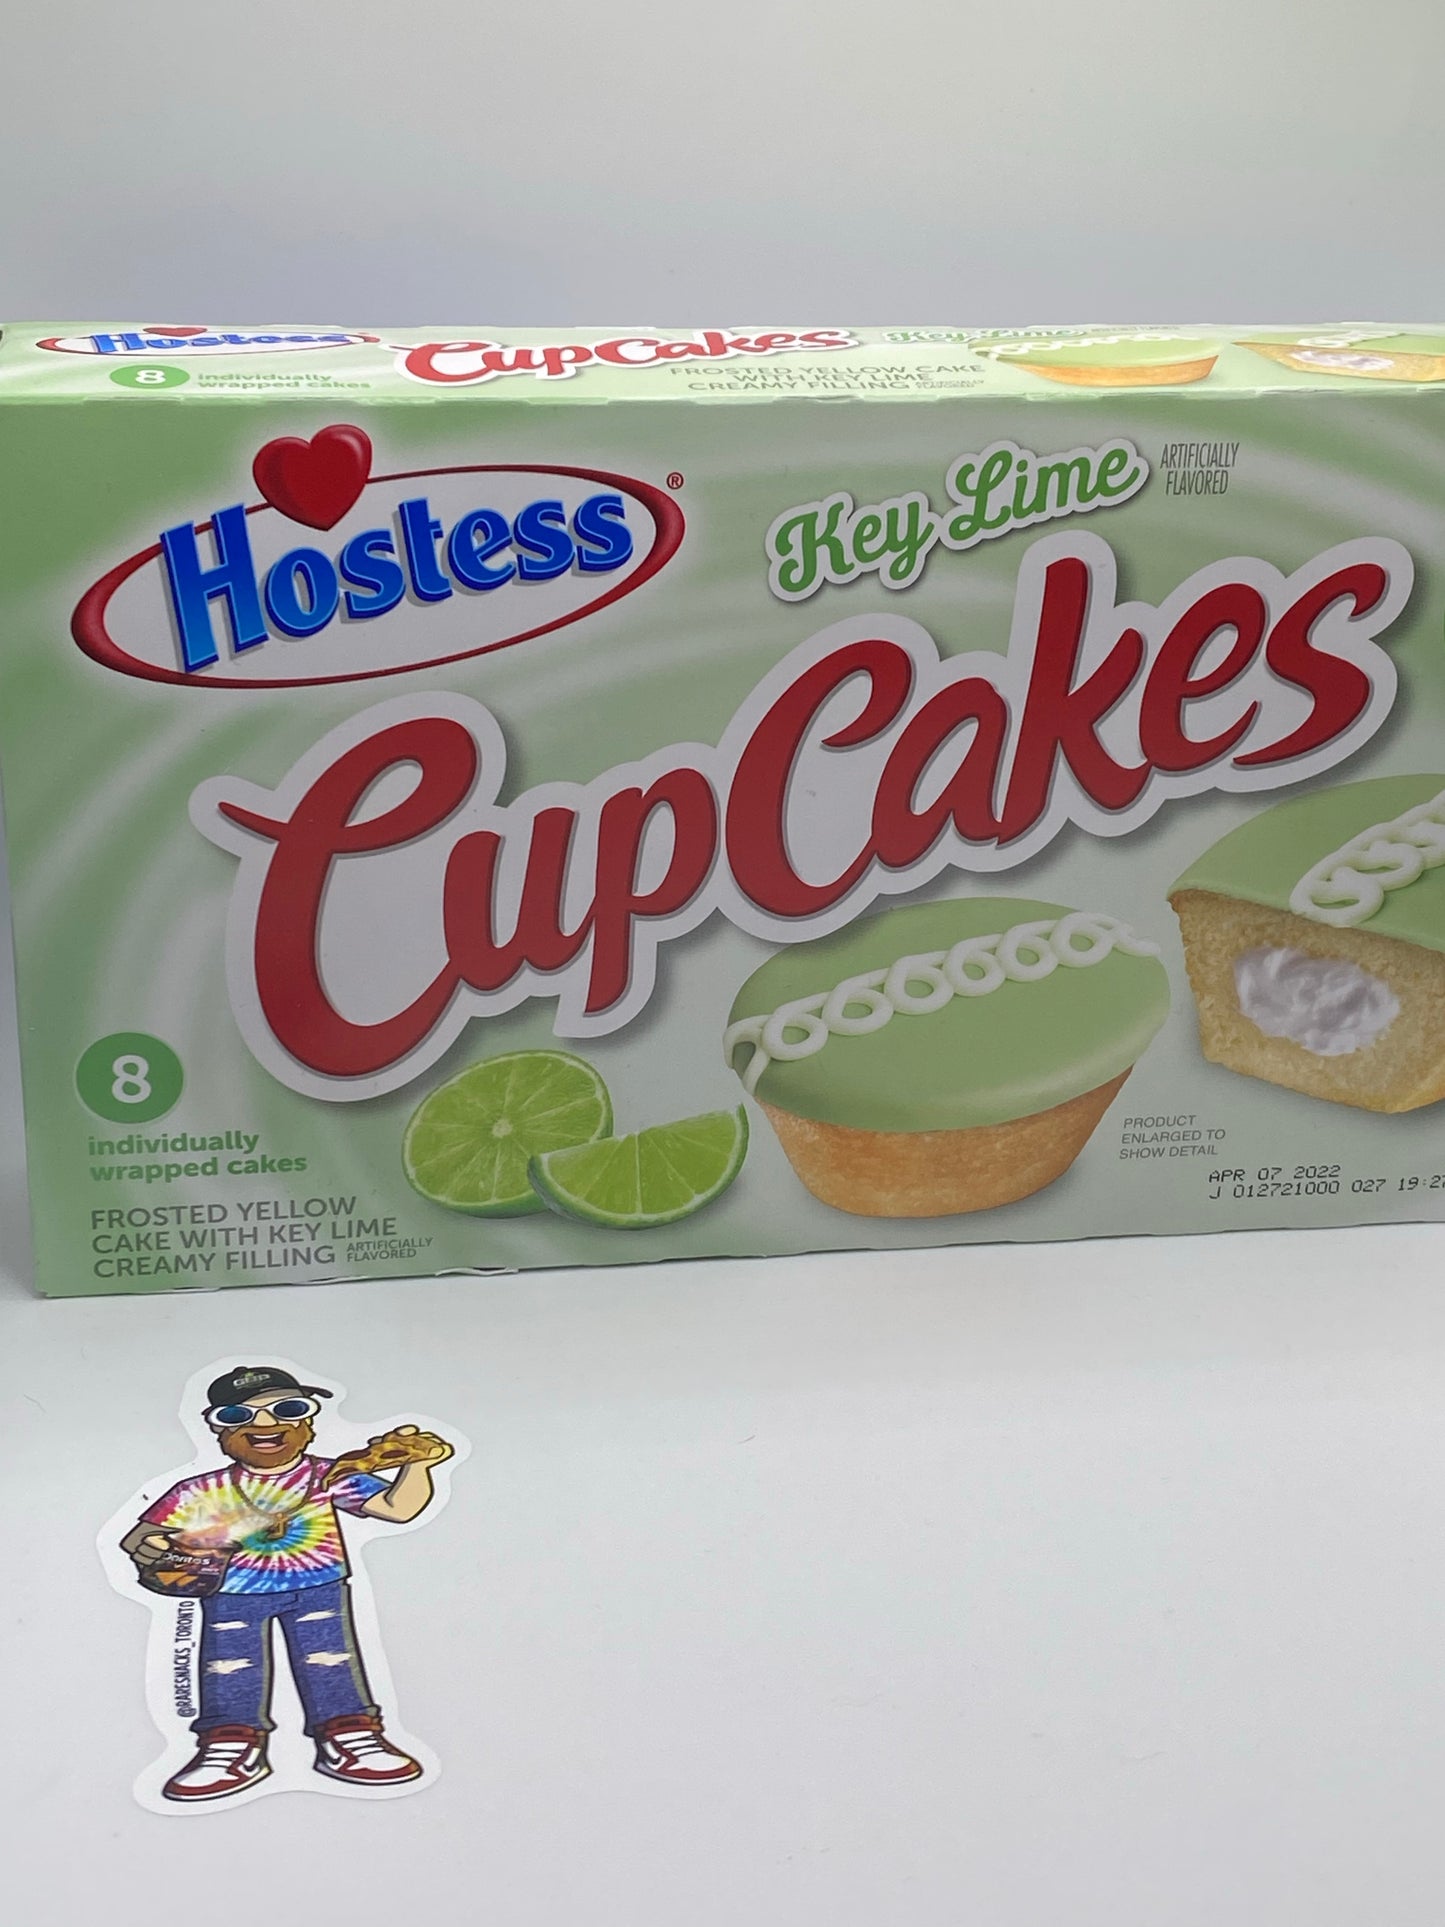 Hostess Cupcakes Key Lime Pie Limited Edition 8pk